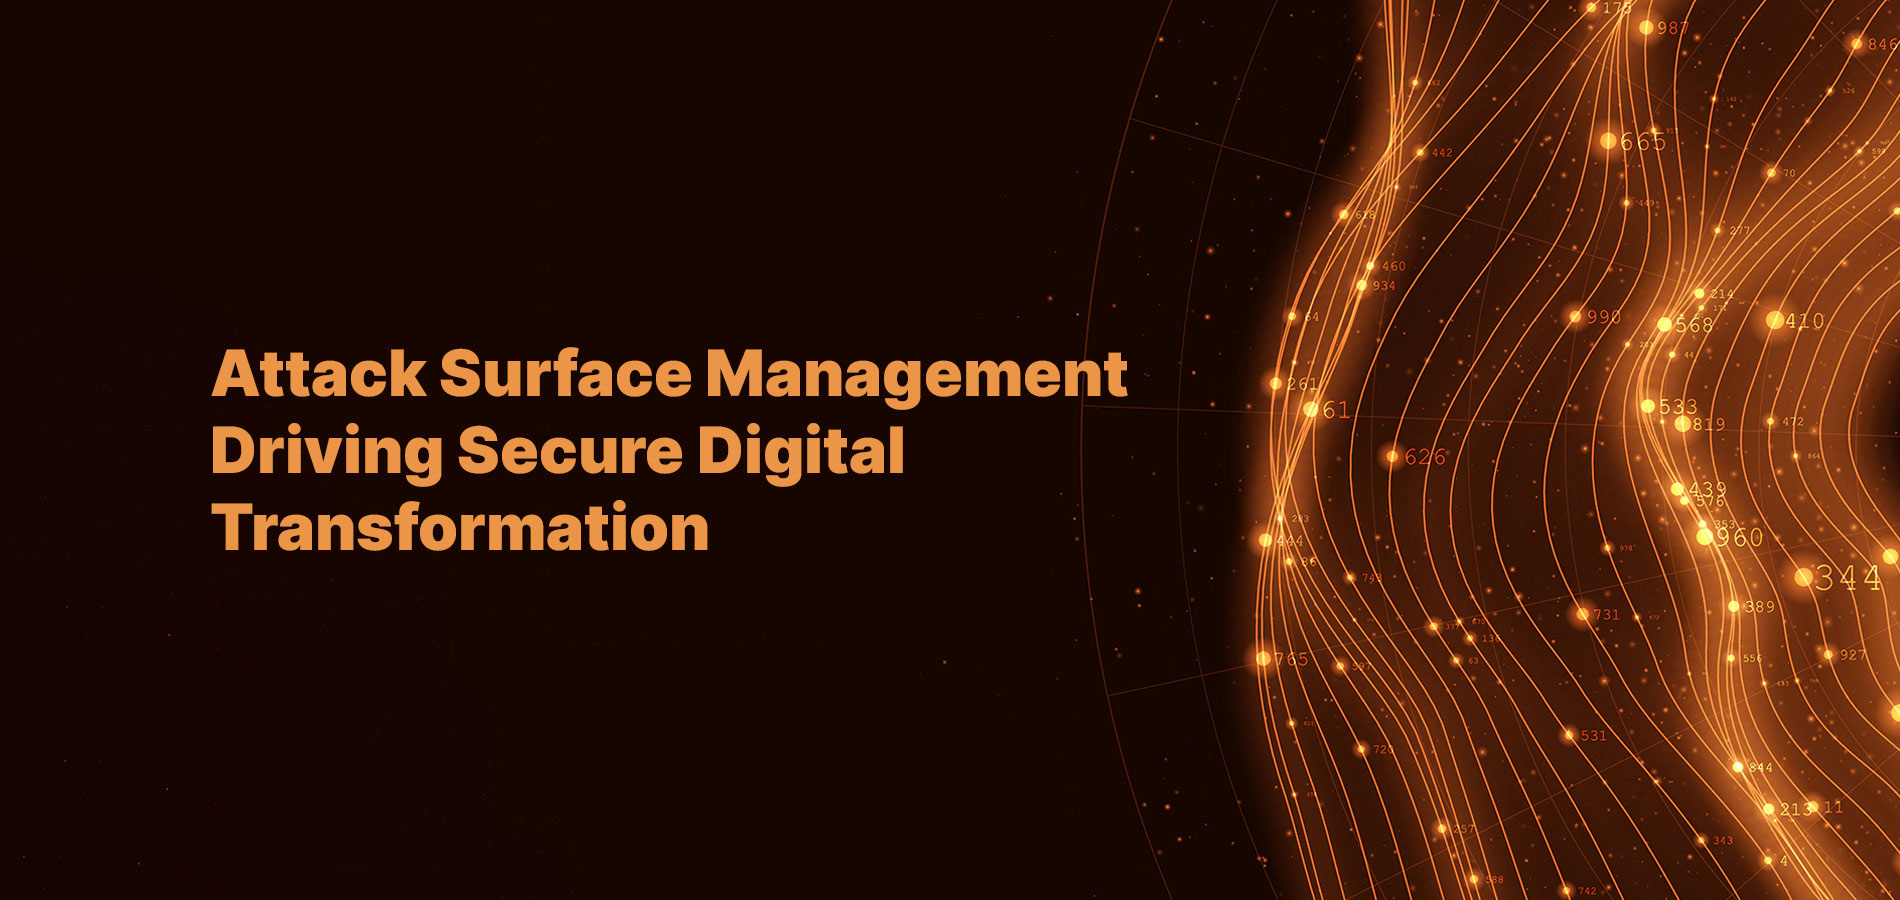 Attack Surface Management Driving Secure Digital Transformation.